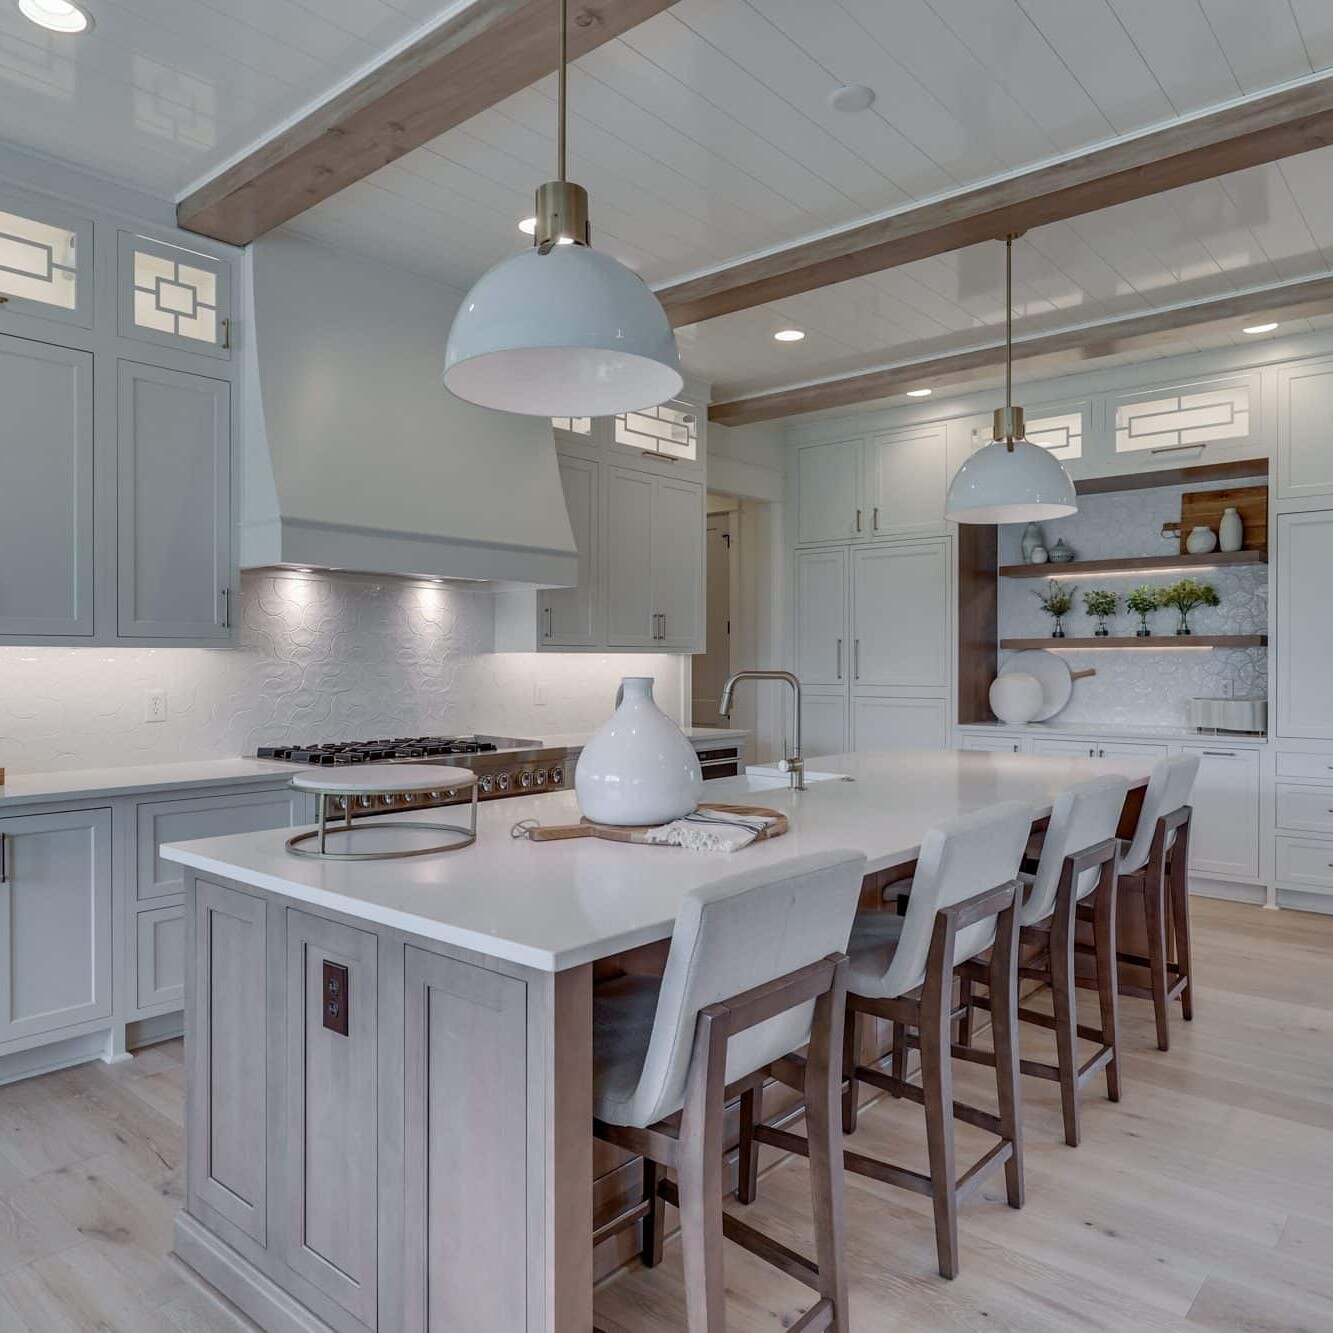 A white kitchen with wood beams and a center island.